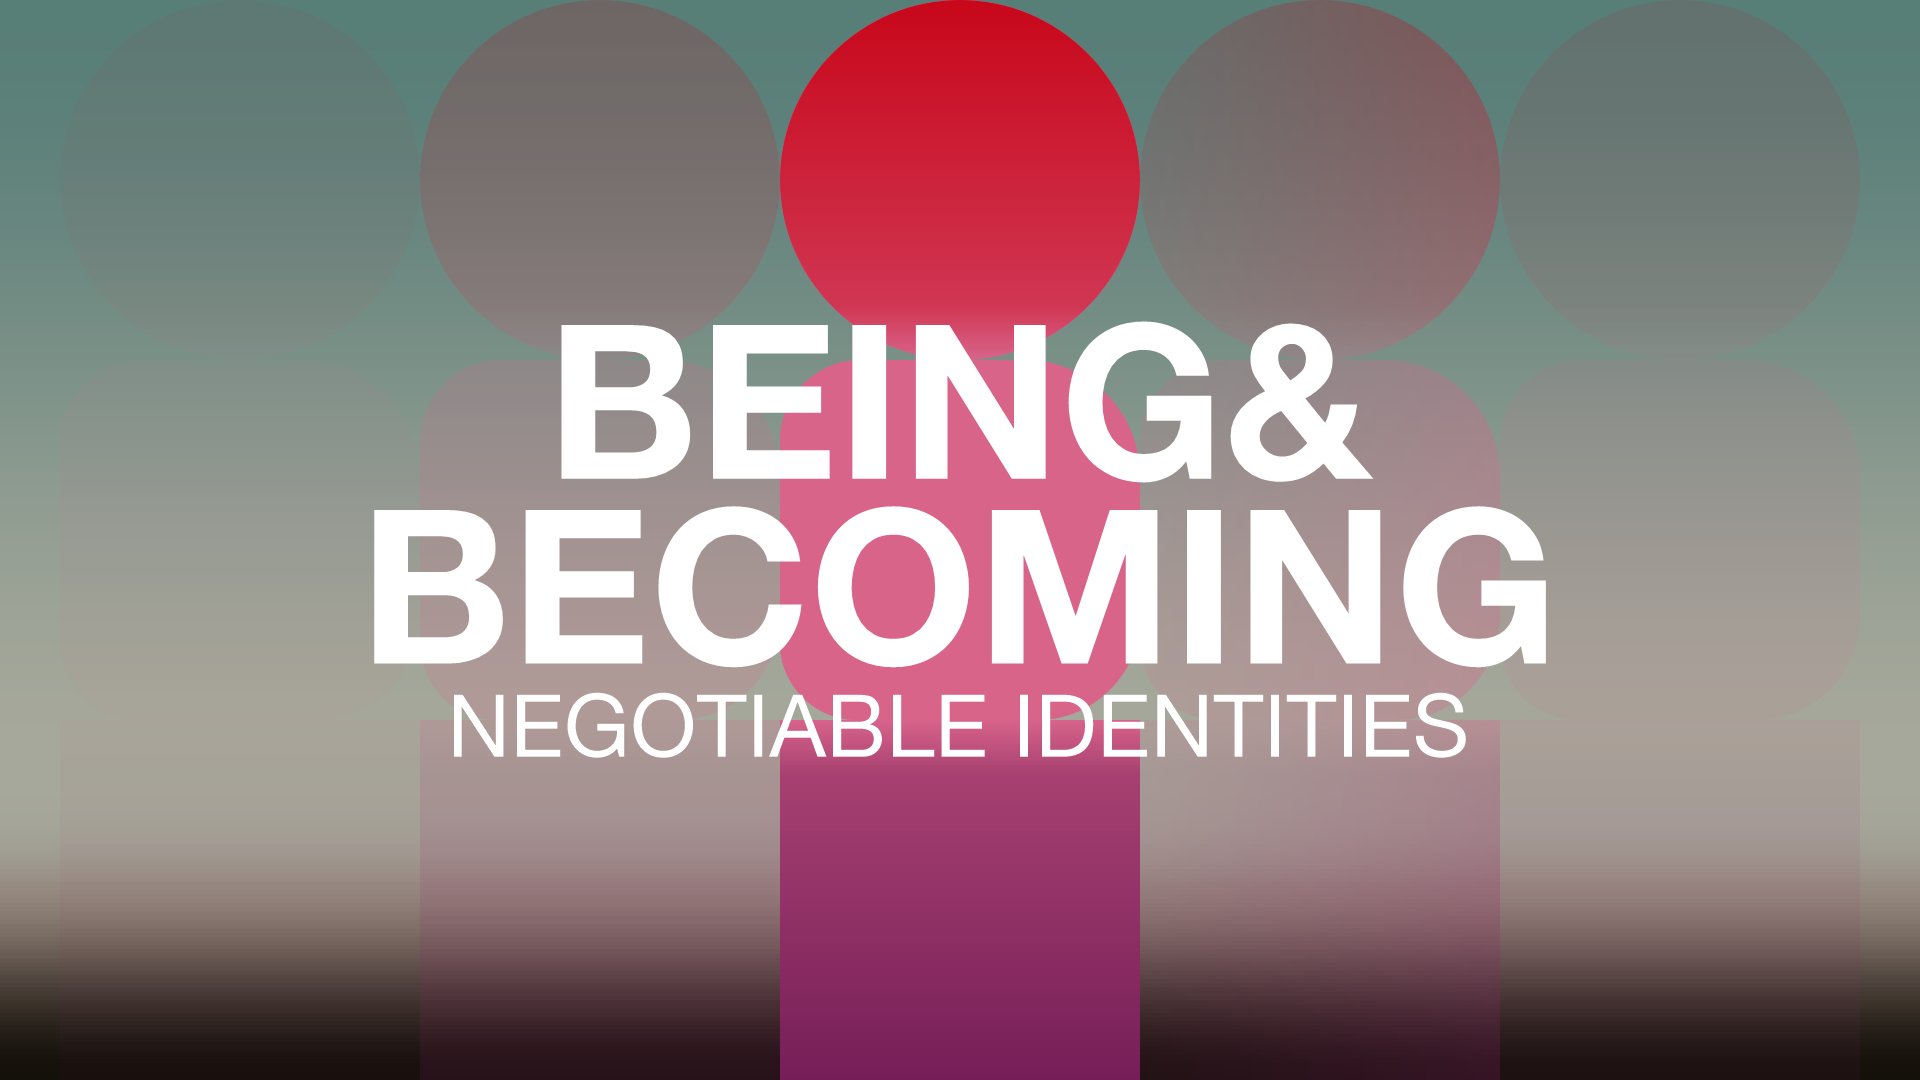 BEING & BECOMING GROUP EXHIBITION